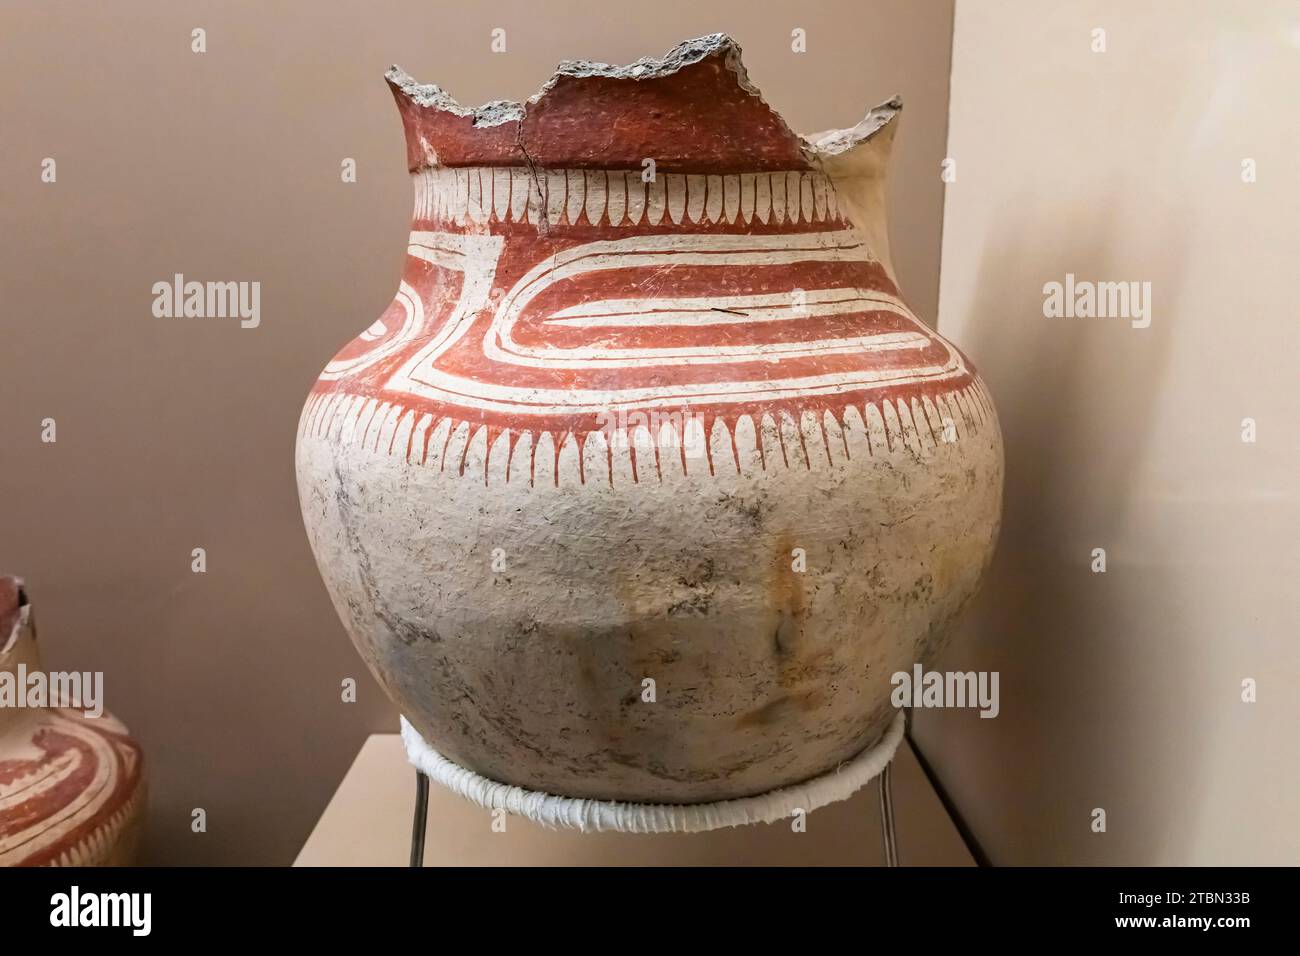 Ban Chiang national museum, Painted pottery of middle period, Ban Chiang, Udon Thani, Isan, Thailand, Southeast Asia, Asia Stock Photo